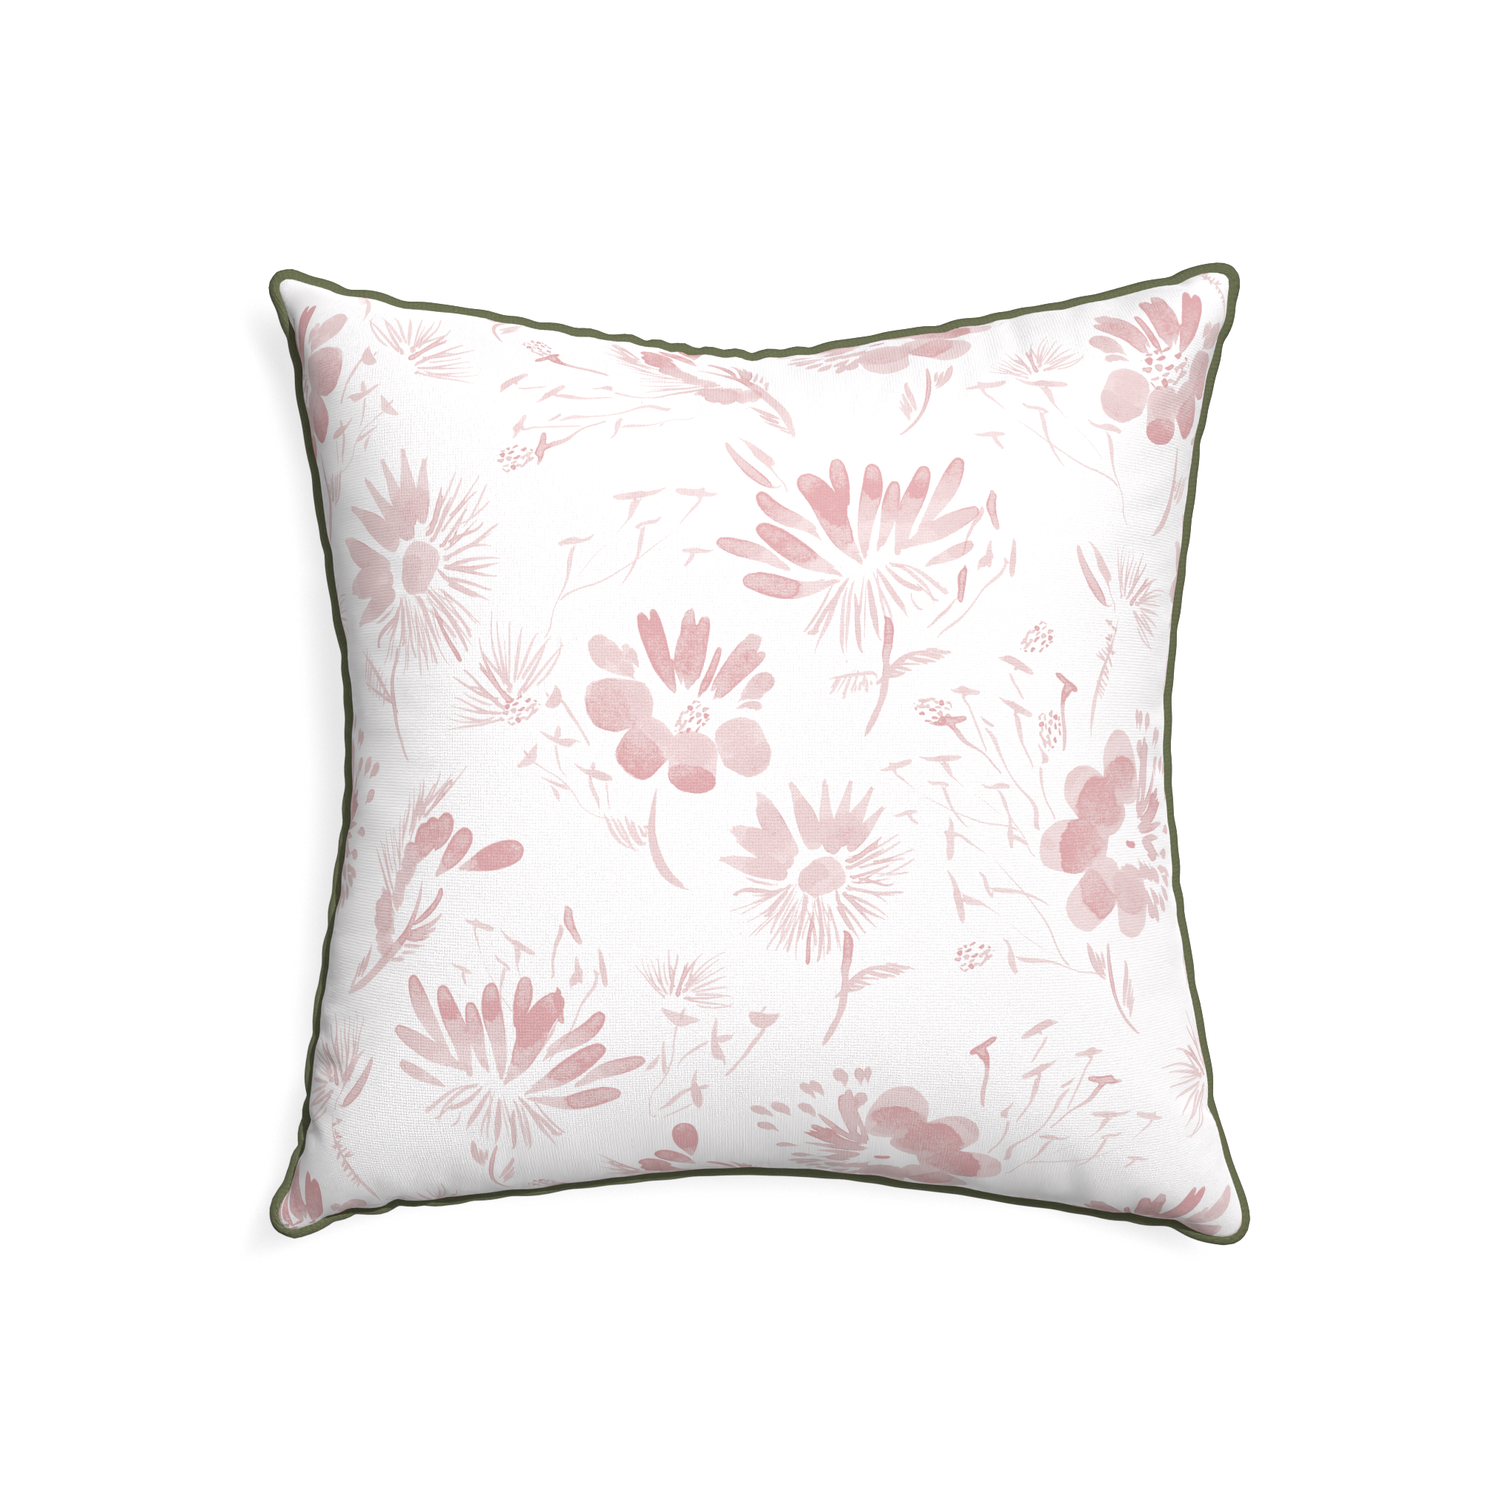 22-square blake custom pink floralpillow with f piping on white background